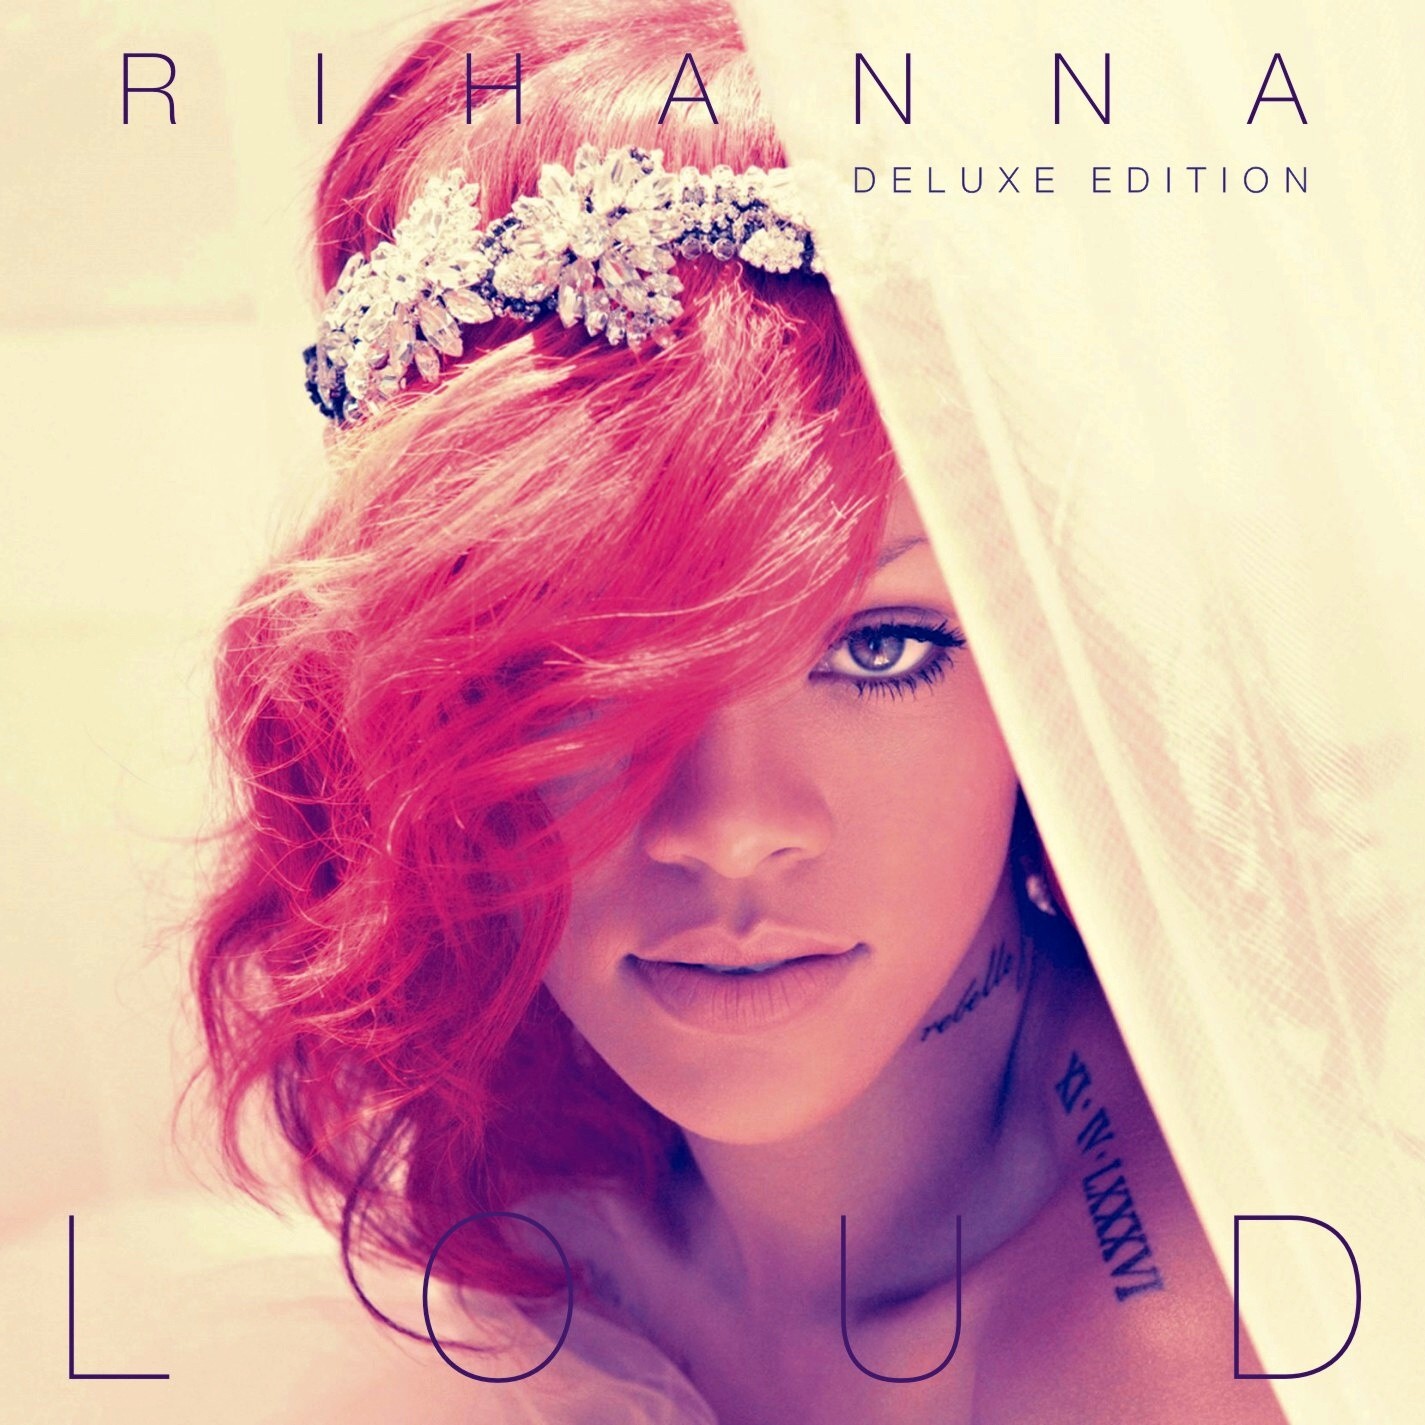 RIHANNA-LOUD 2010-320-KBPS   Click here to Download